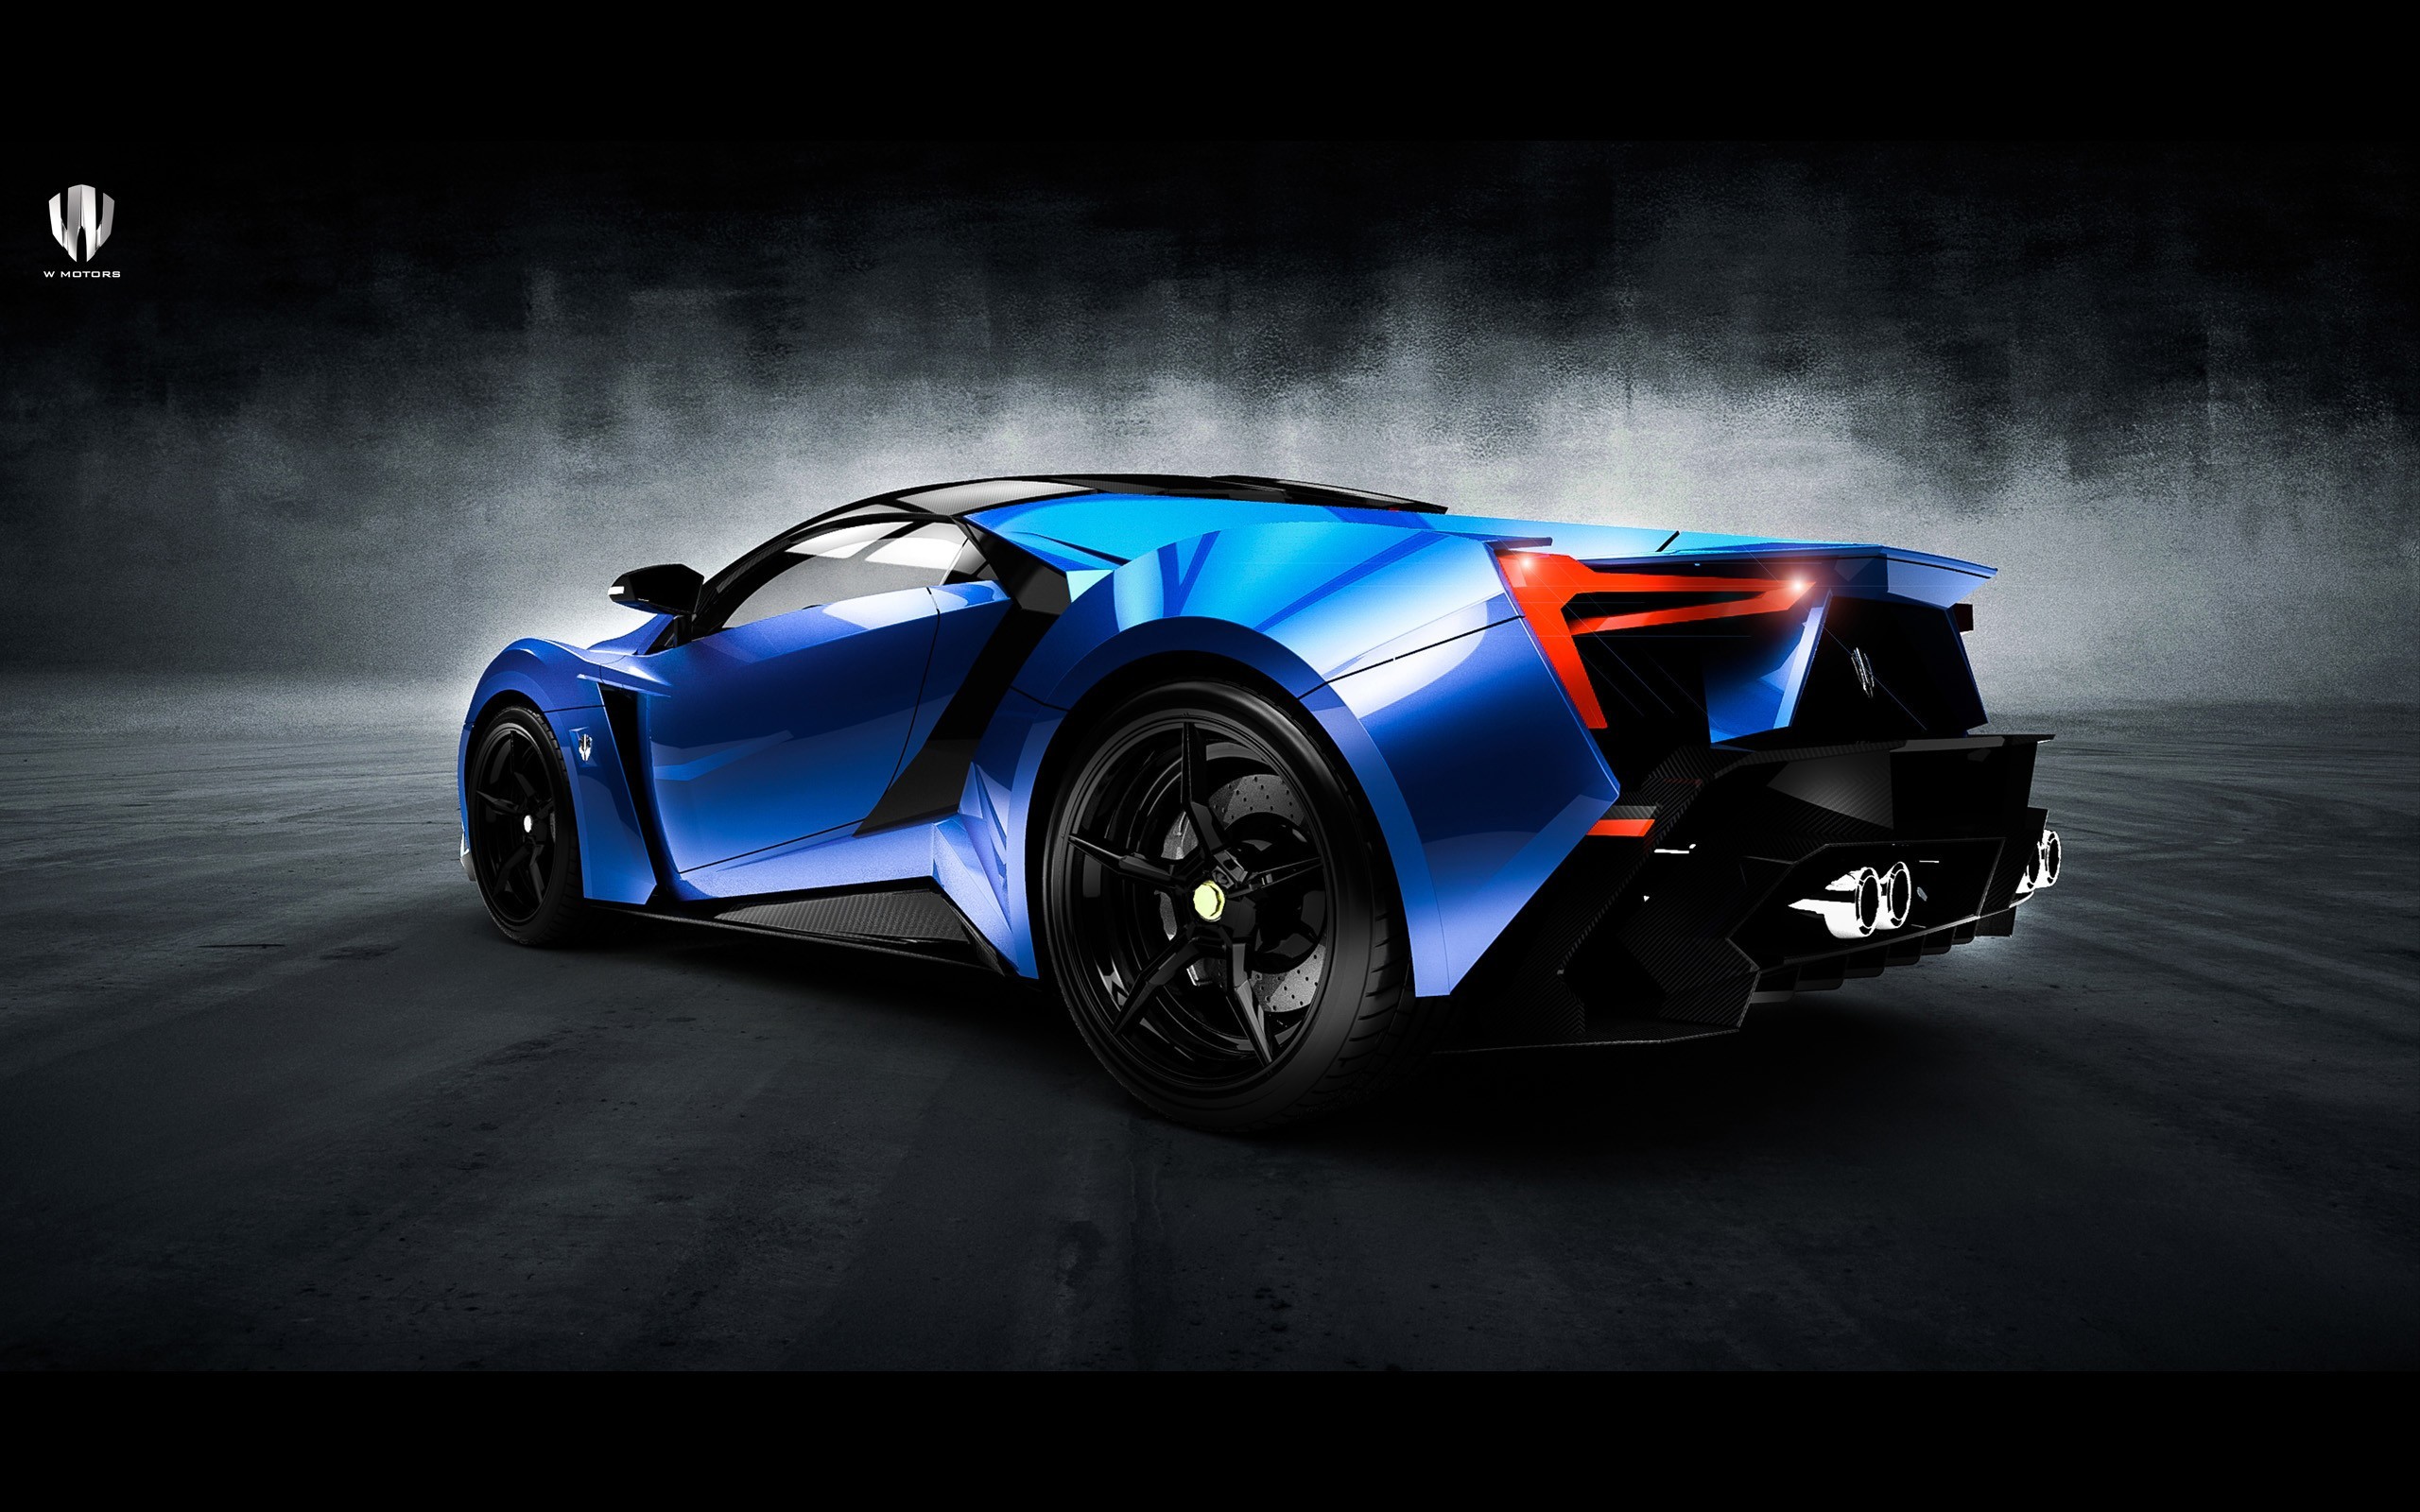 2560x1600 ... Super Sports Cars Wallpapers Lovely Pin Super Cool Cars Wallpapers Hd  Widescreen Lzamgs Cool ...